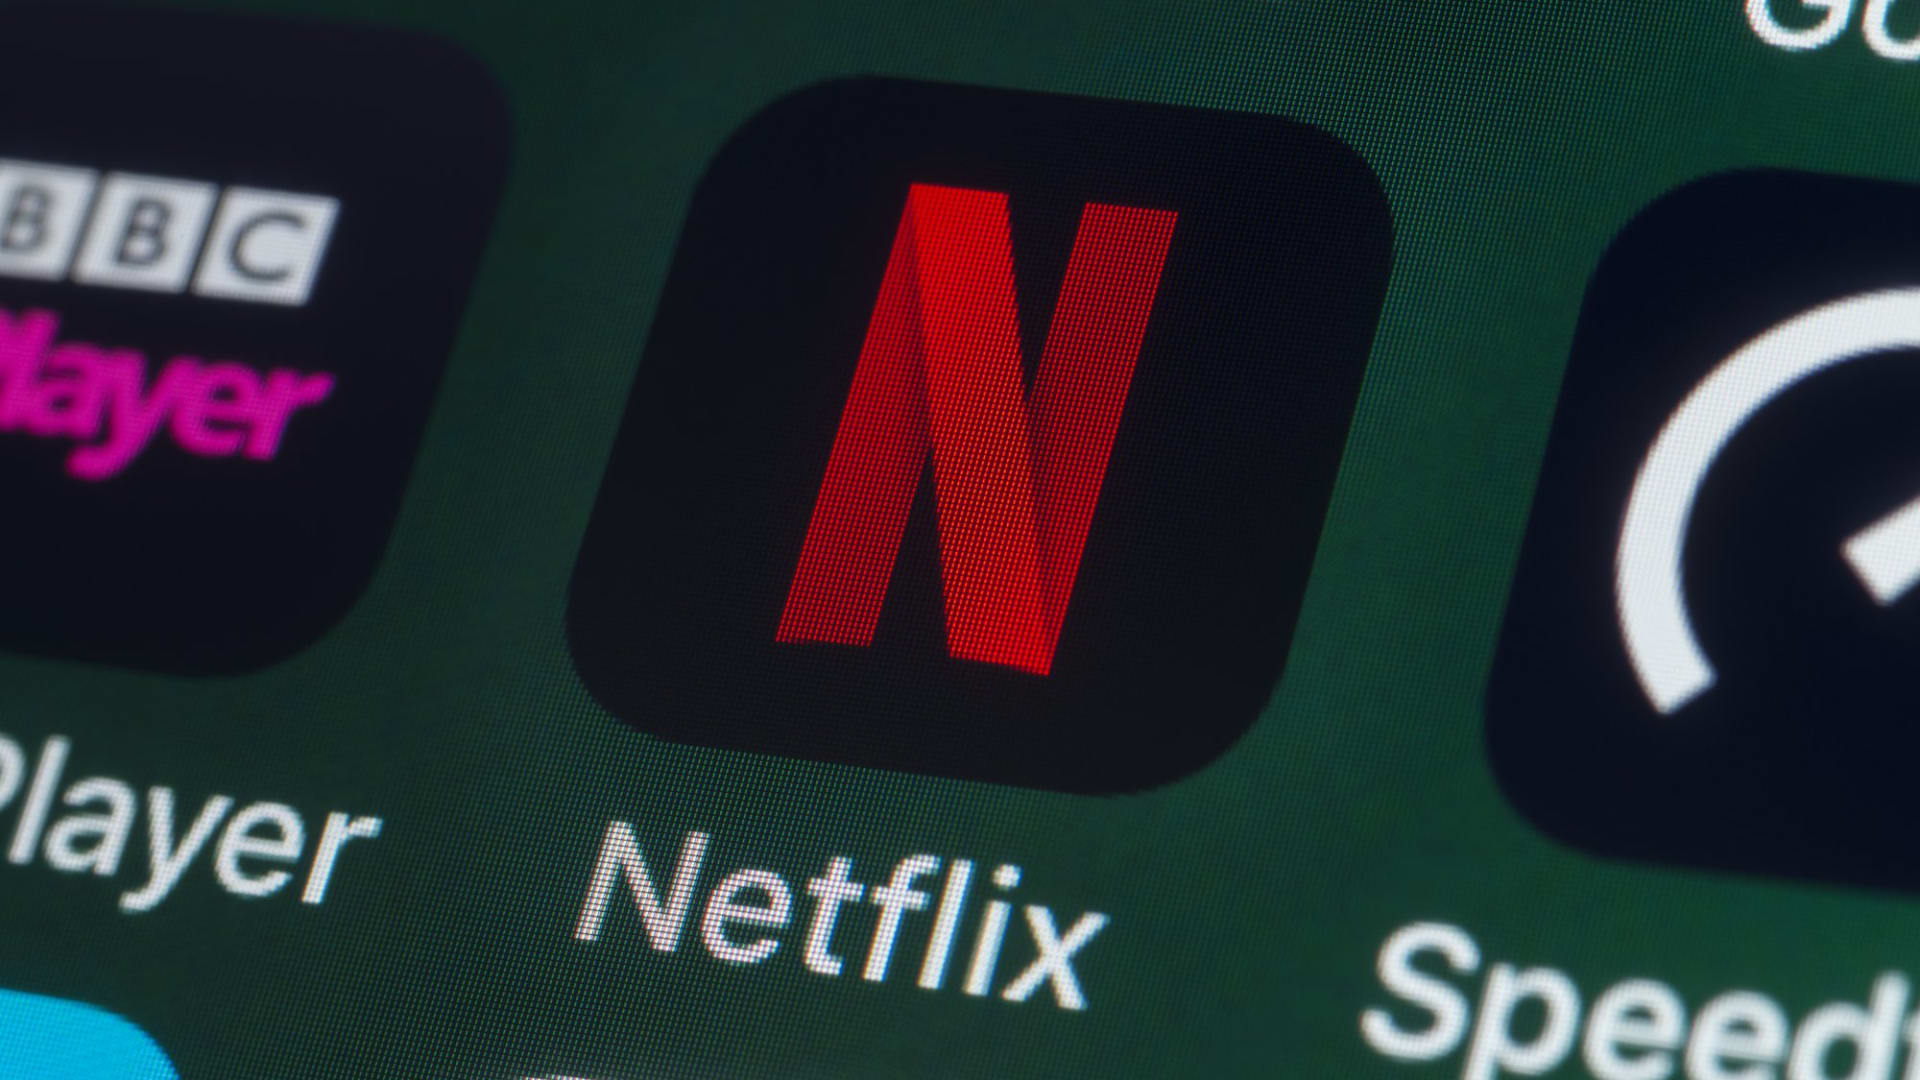 Netflix Made a Big, Risky Change in 2018. Now We Know How It All Turned Out